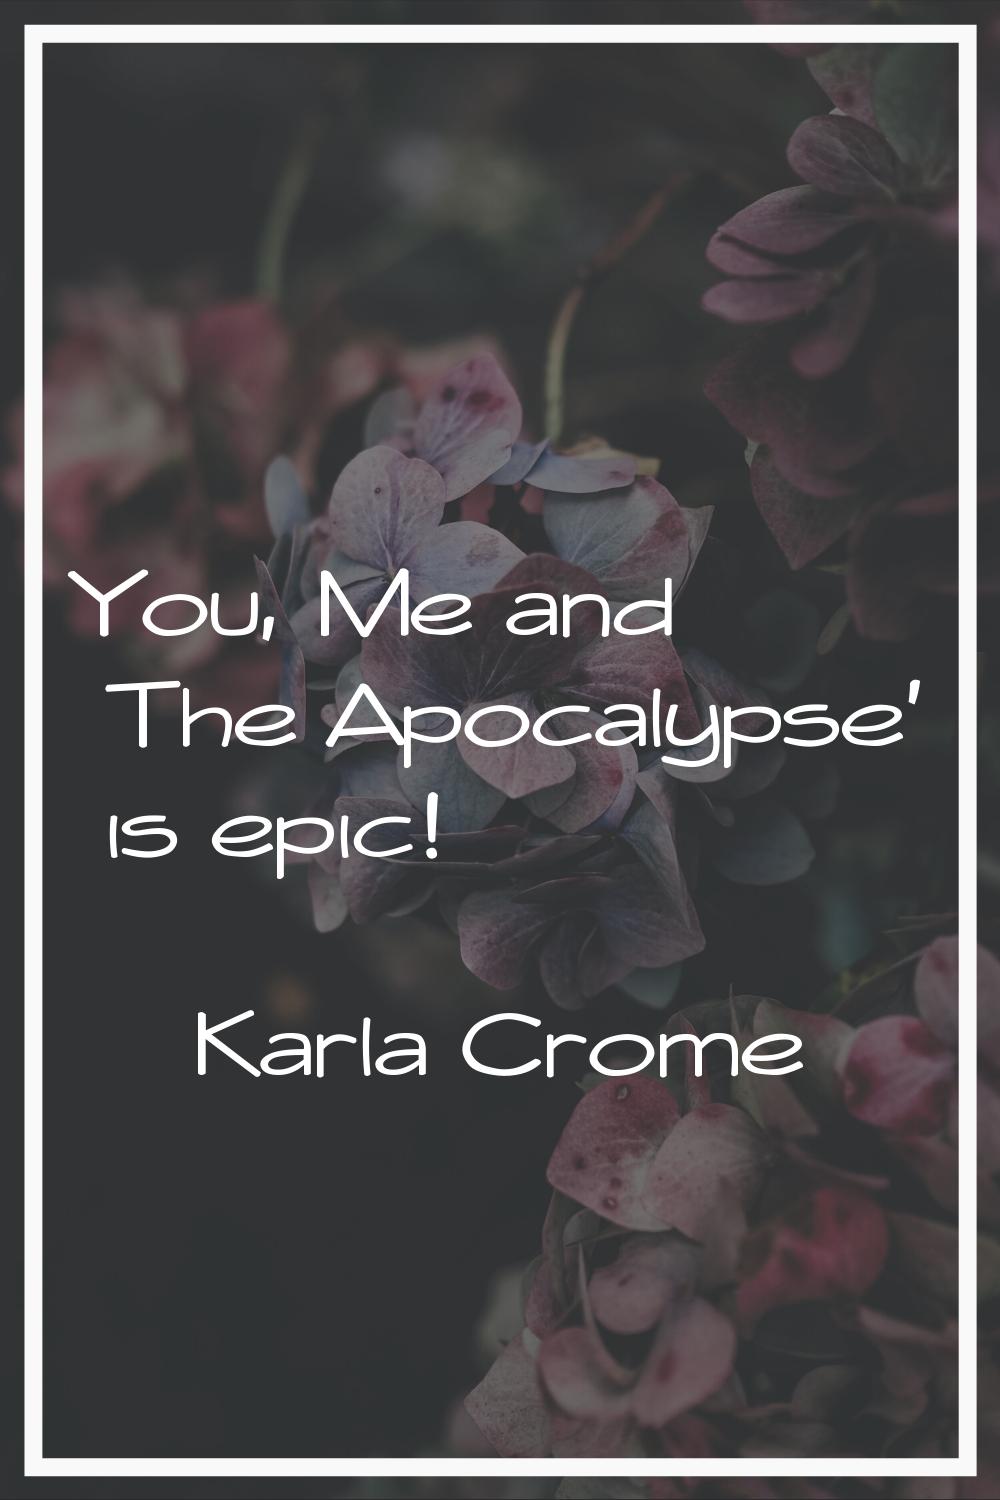 You, Me and The Apocalypse' is epic!